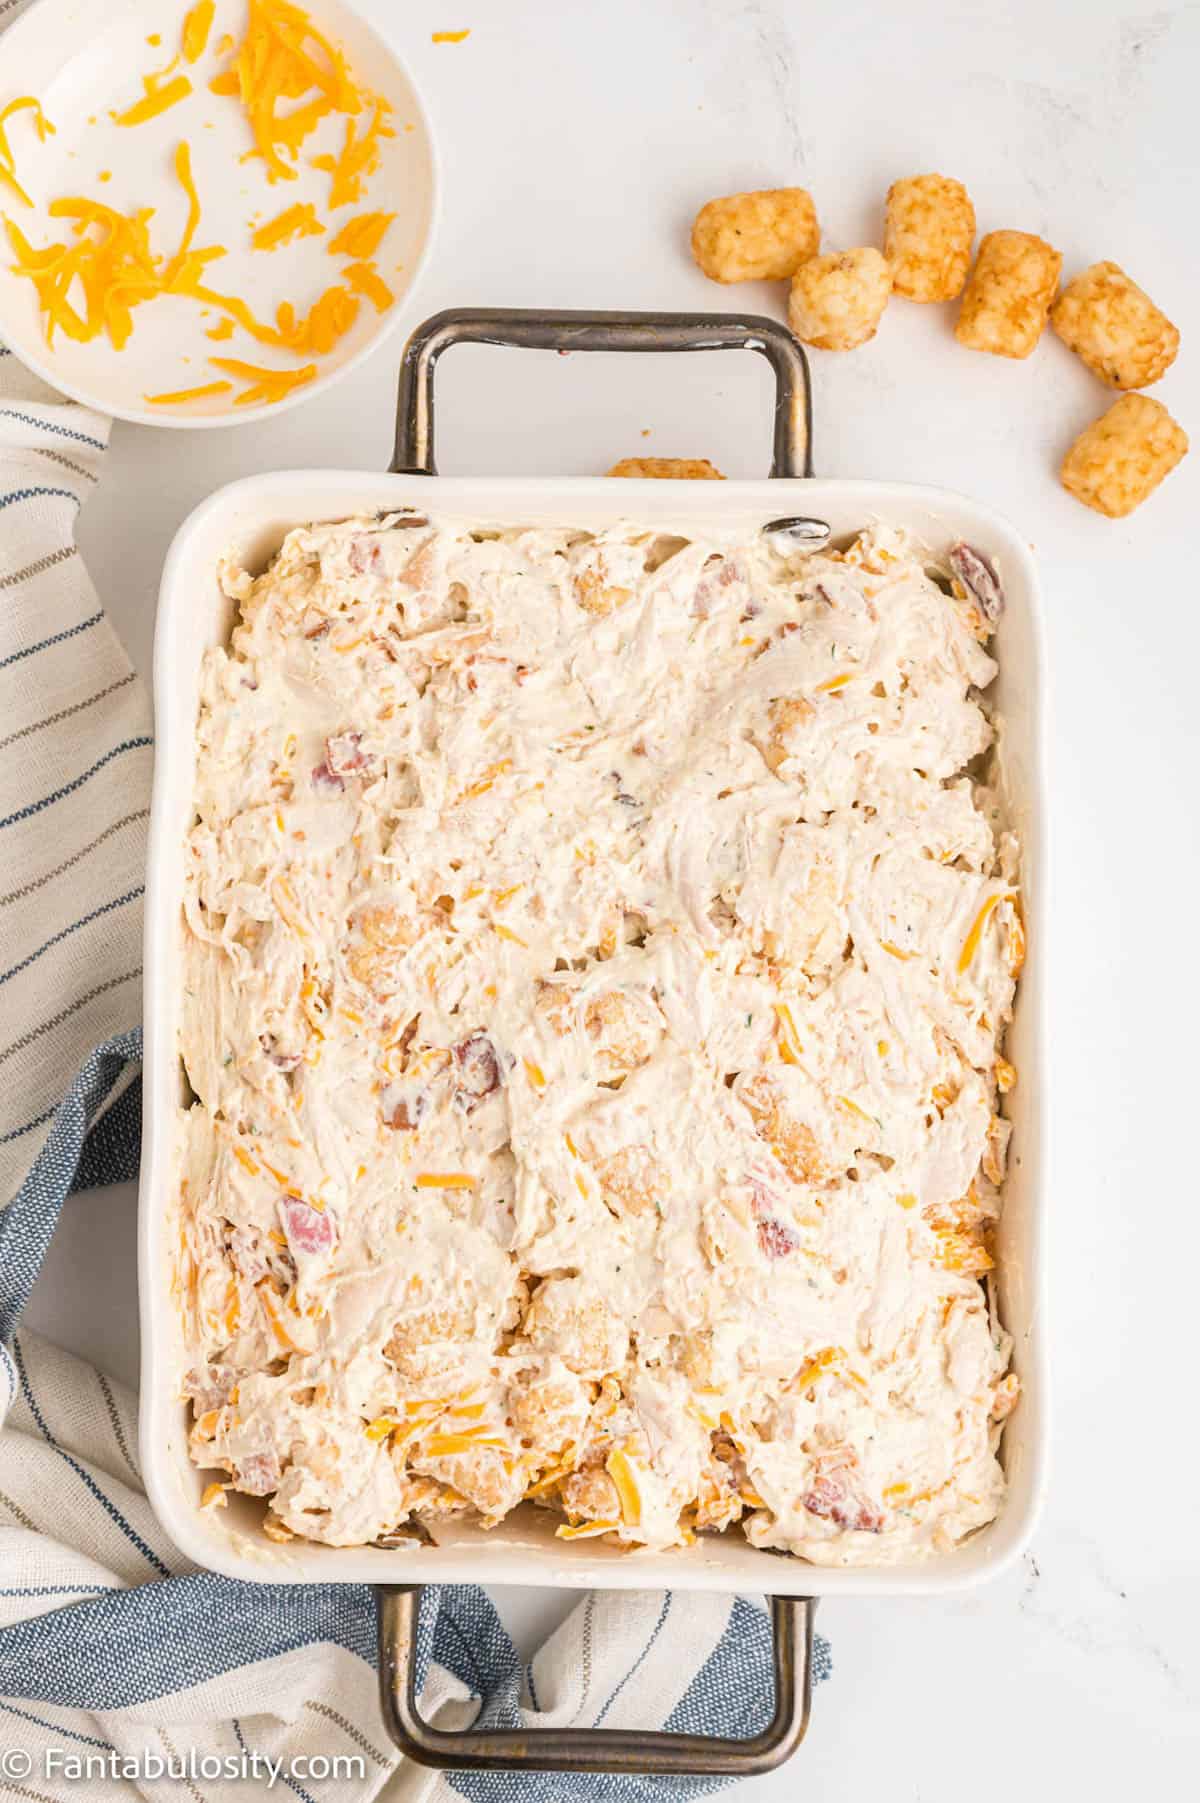 A white baking dish holds the unbaked contents of a creamy cheesy casserole ready to be baked